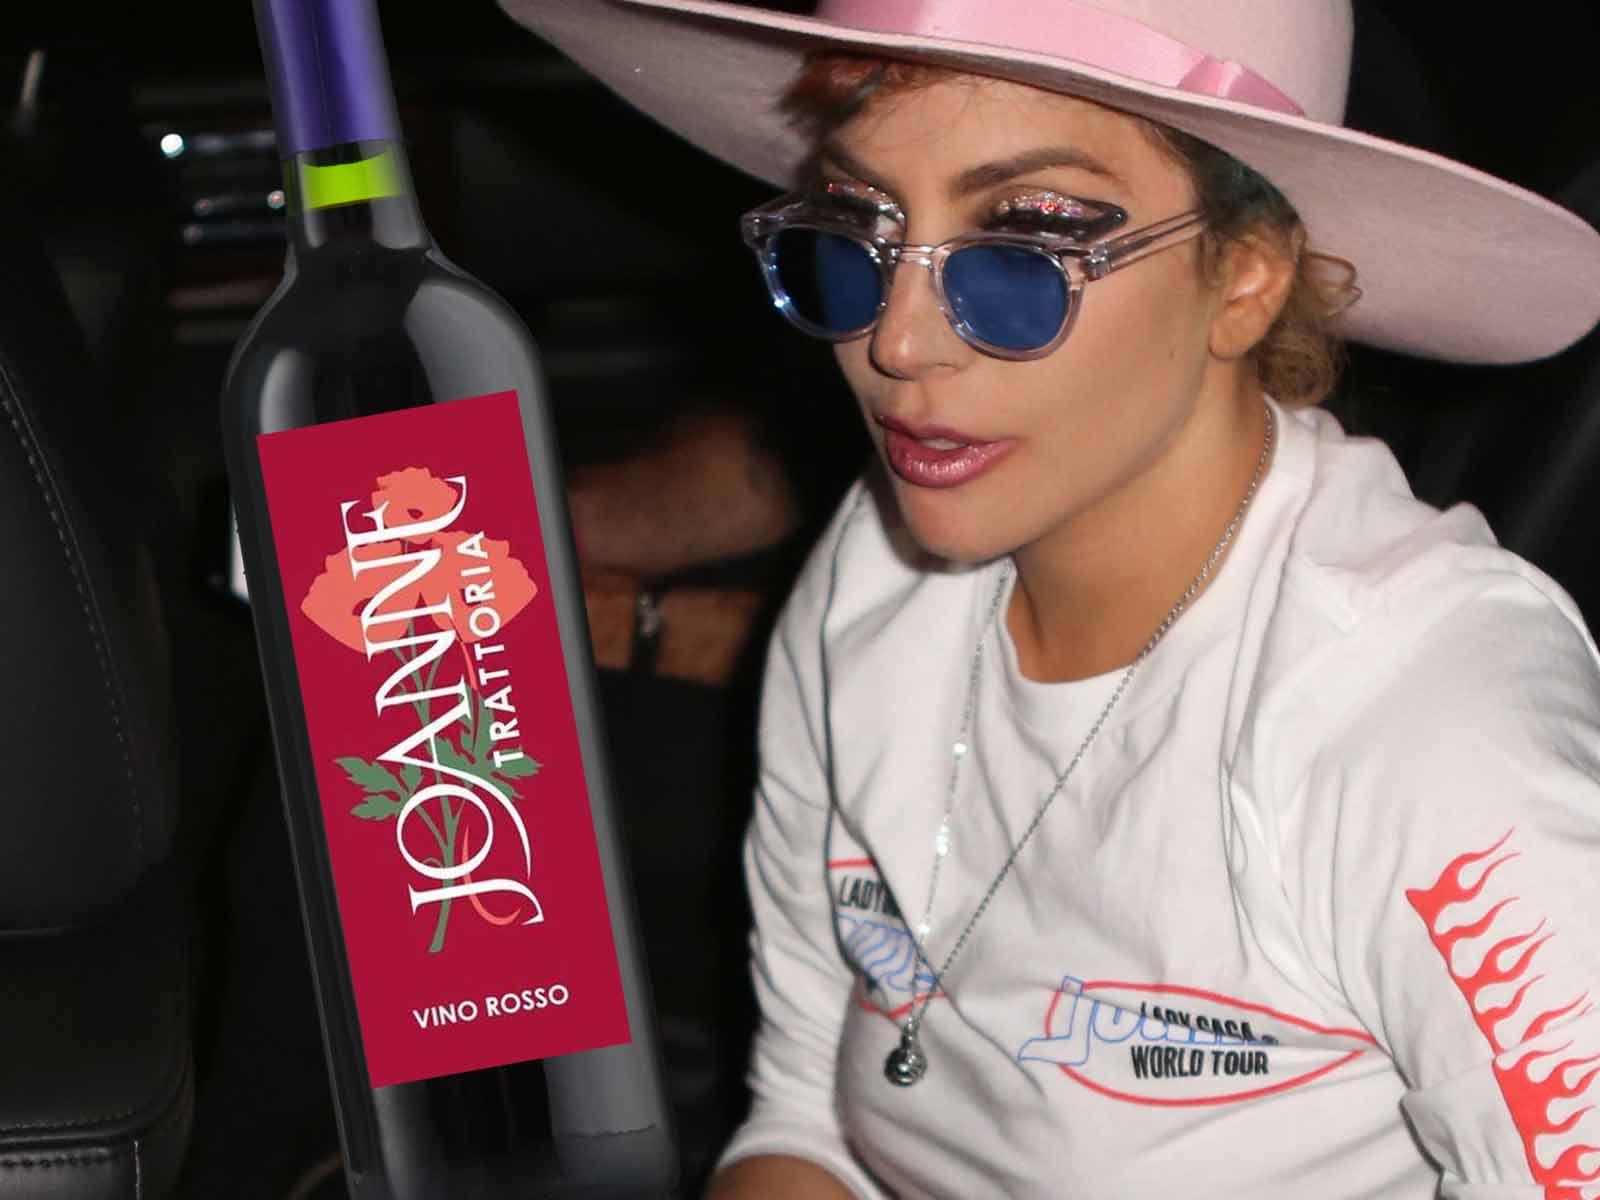 Lady Gaga Getting Ready to Uncork Some New Wines Inspired By Family Eatery